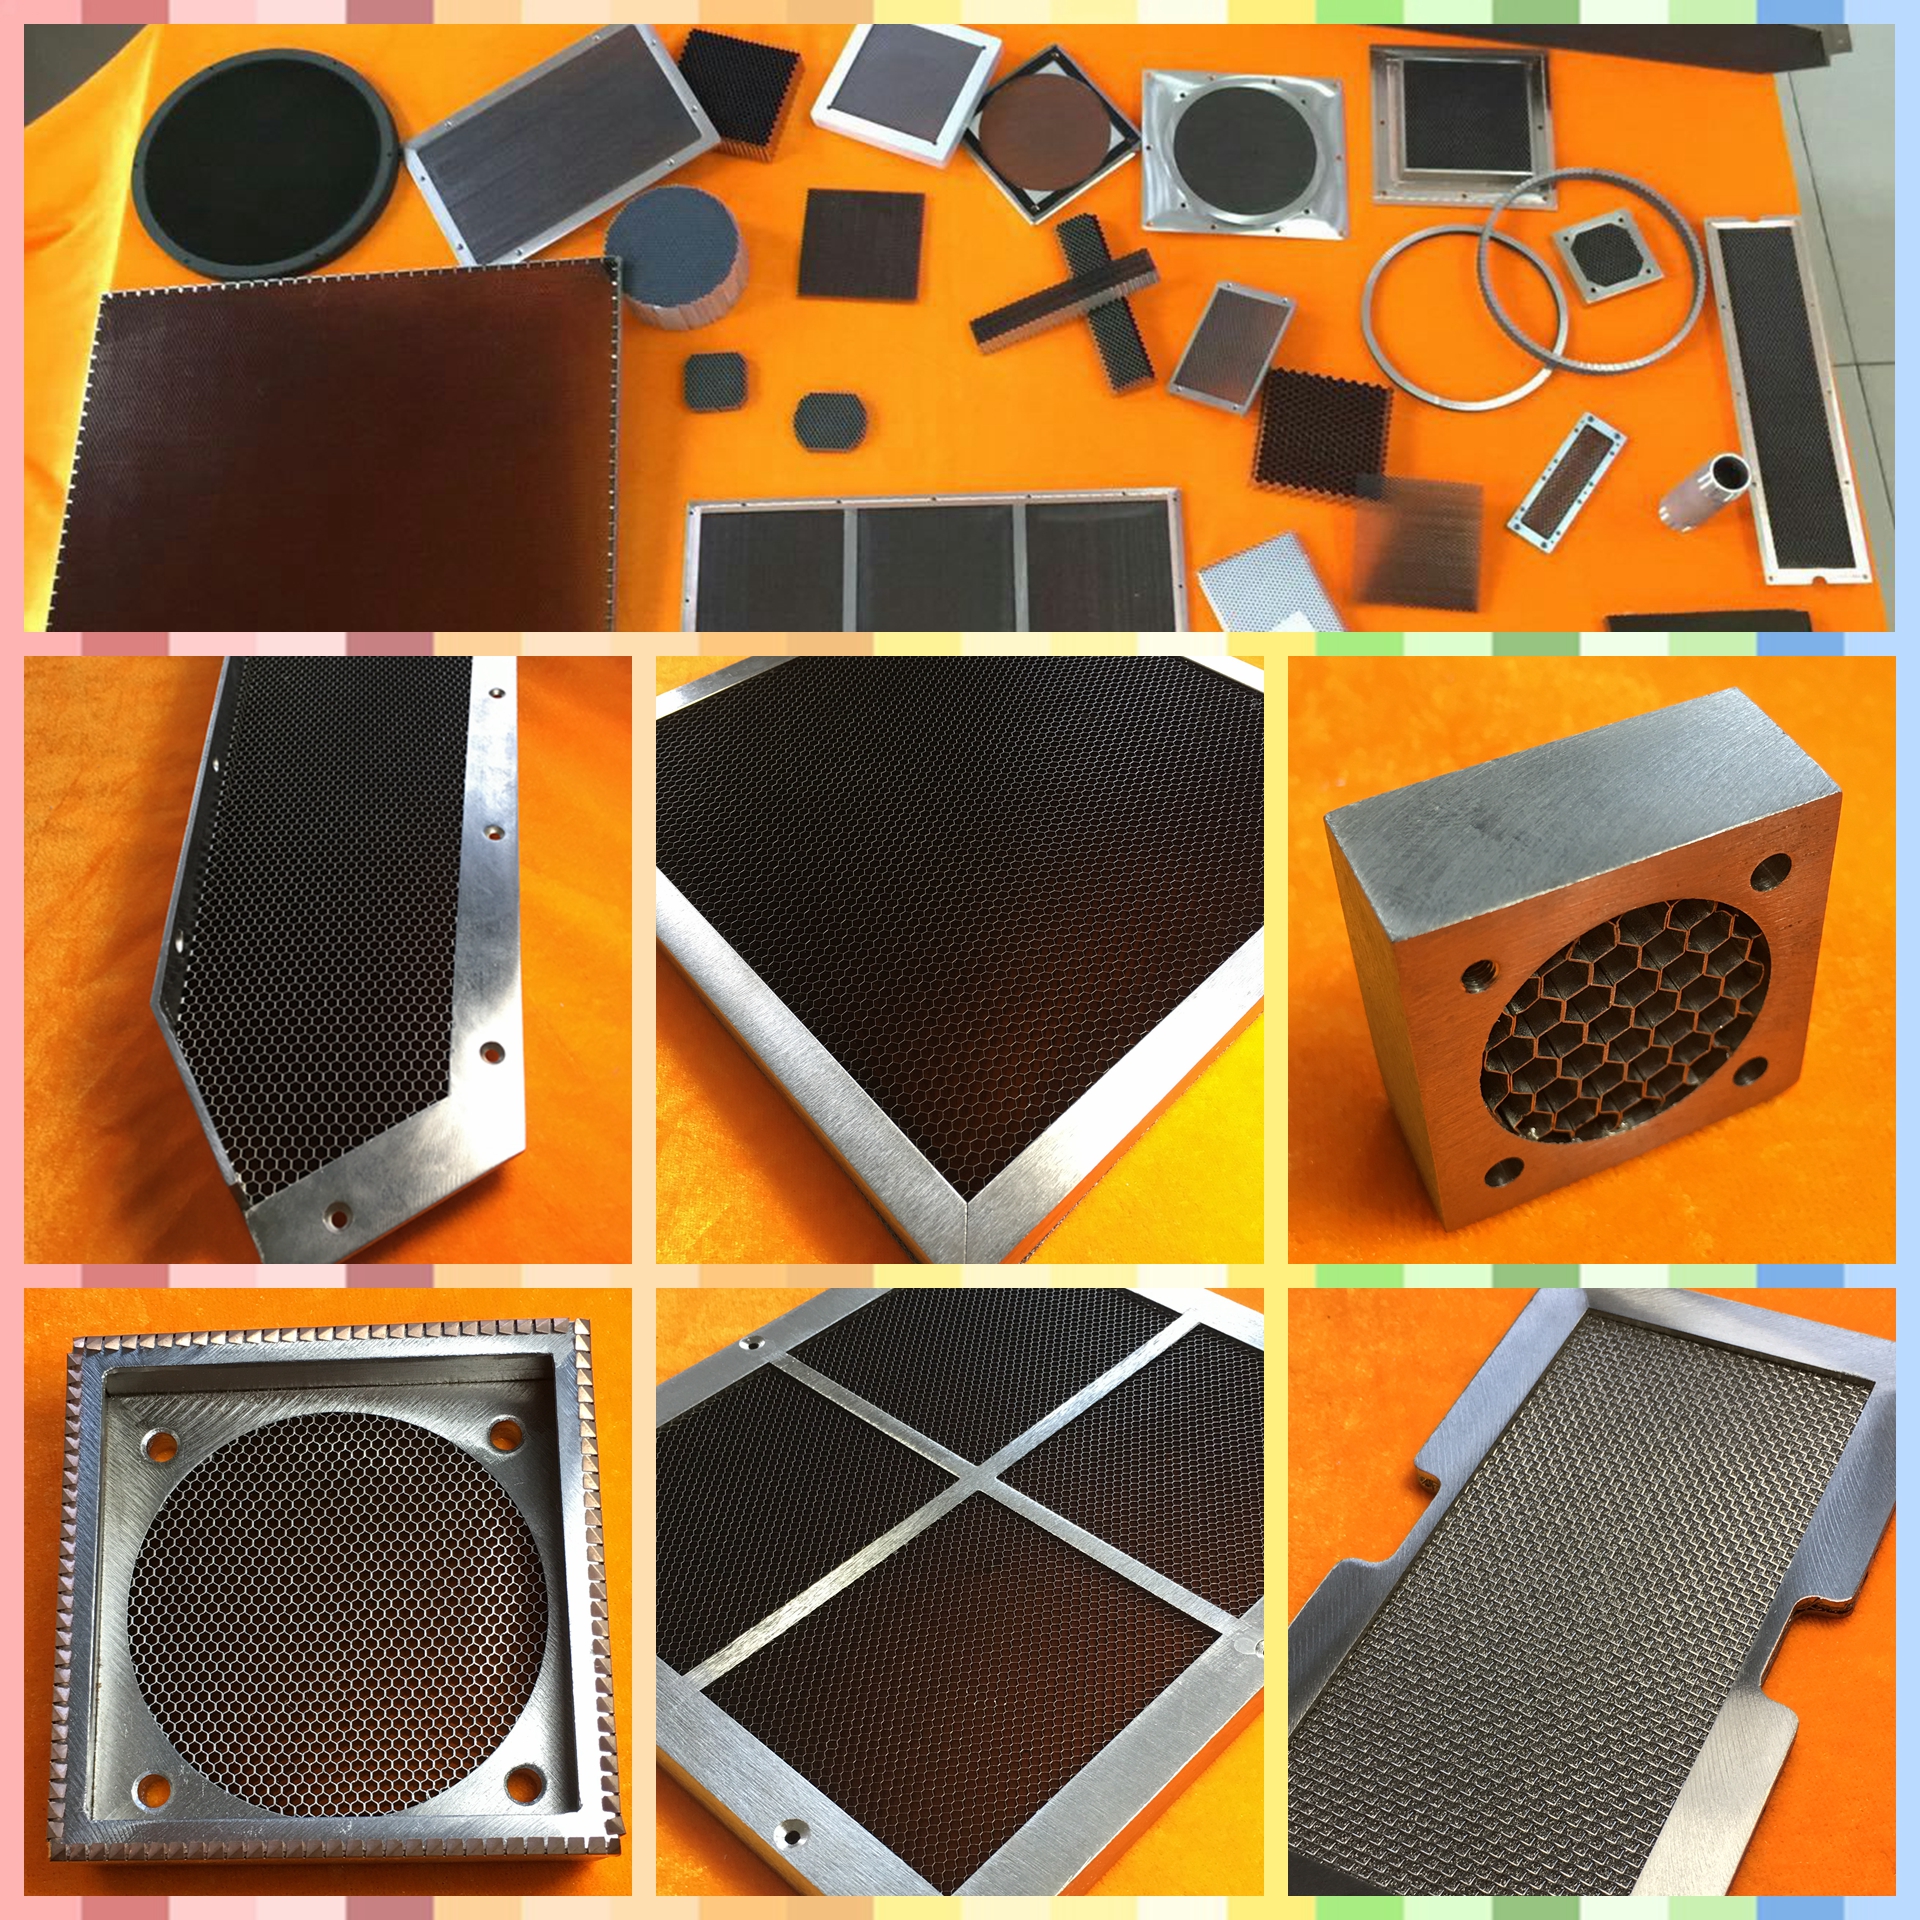 More sample pictures of honeycomb waveguide